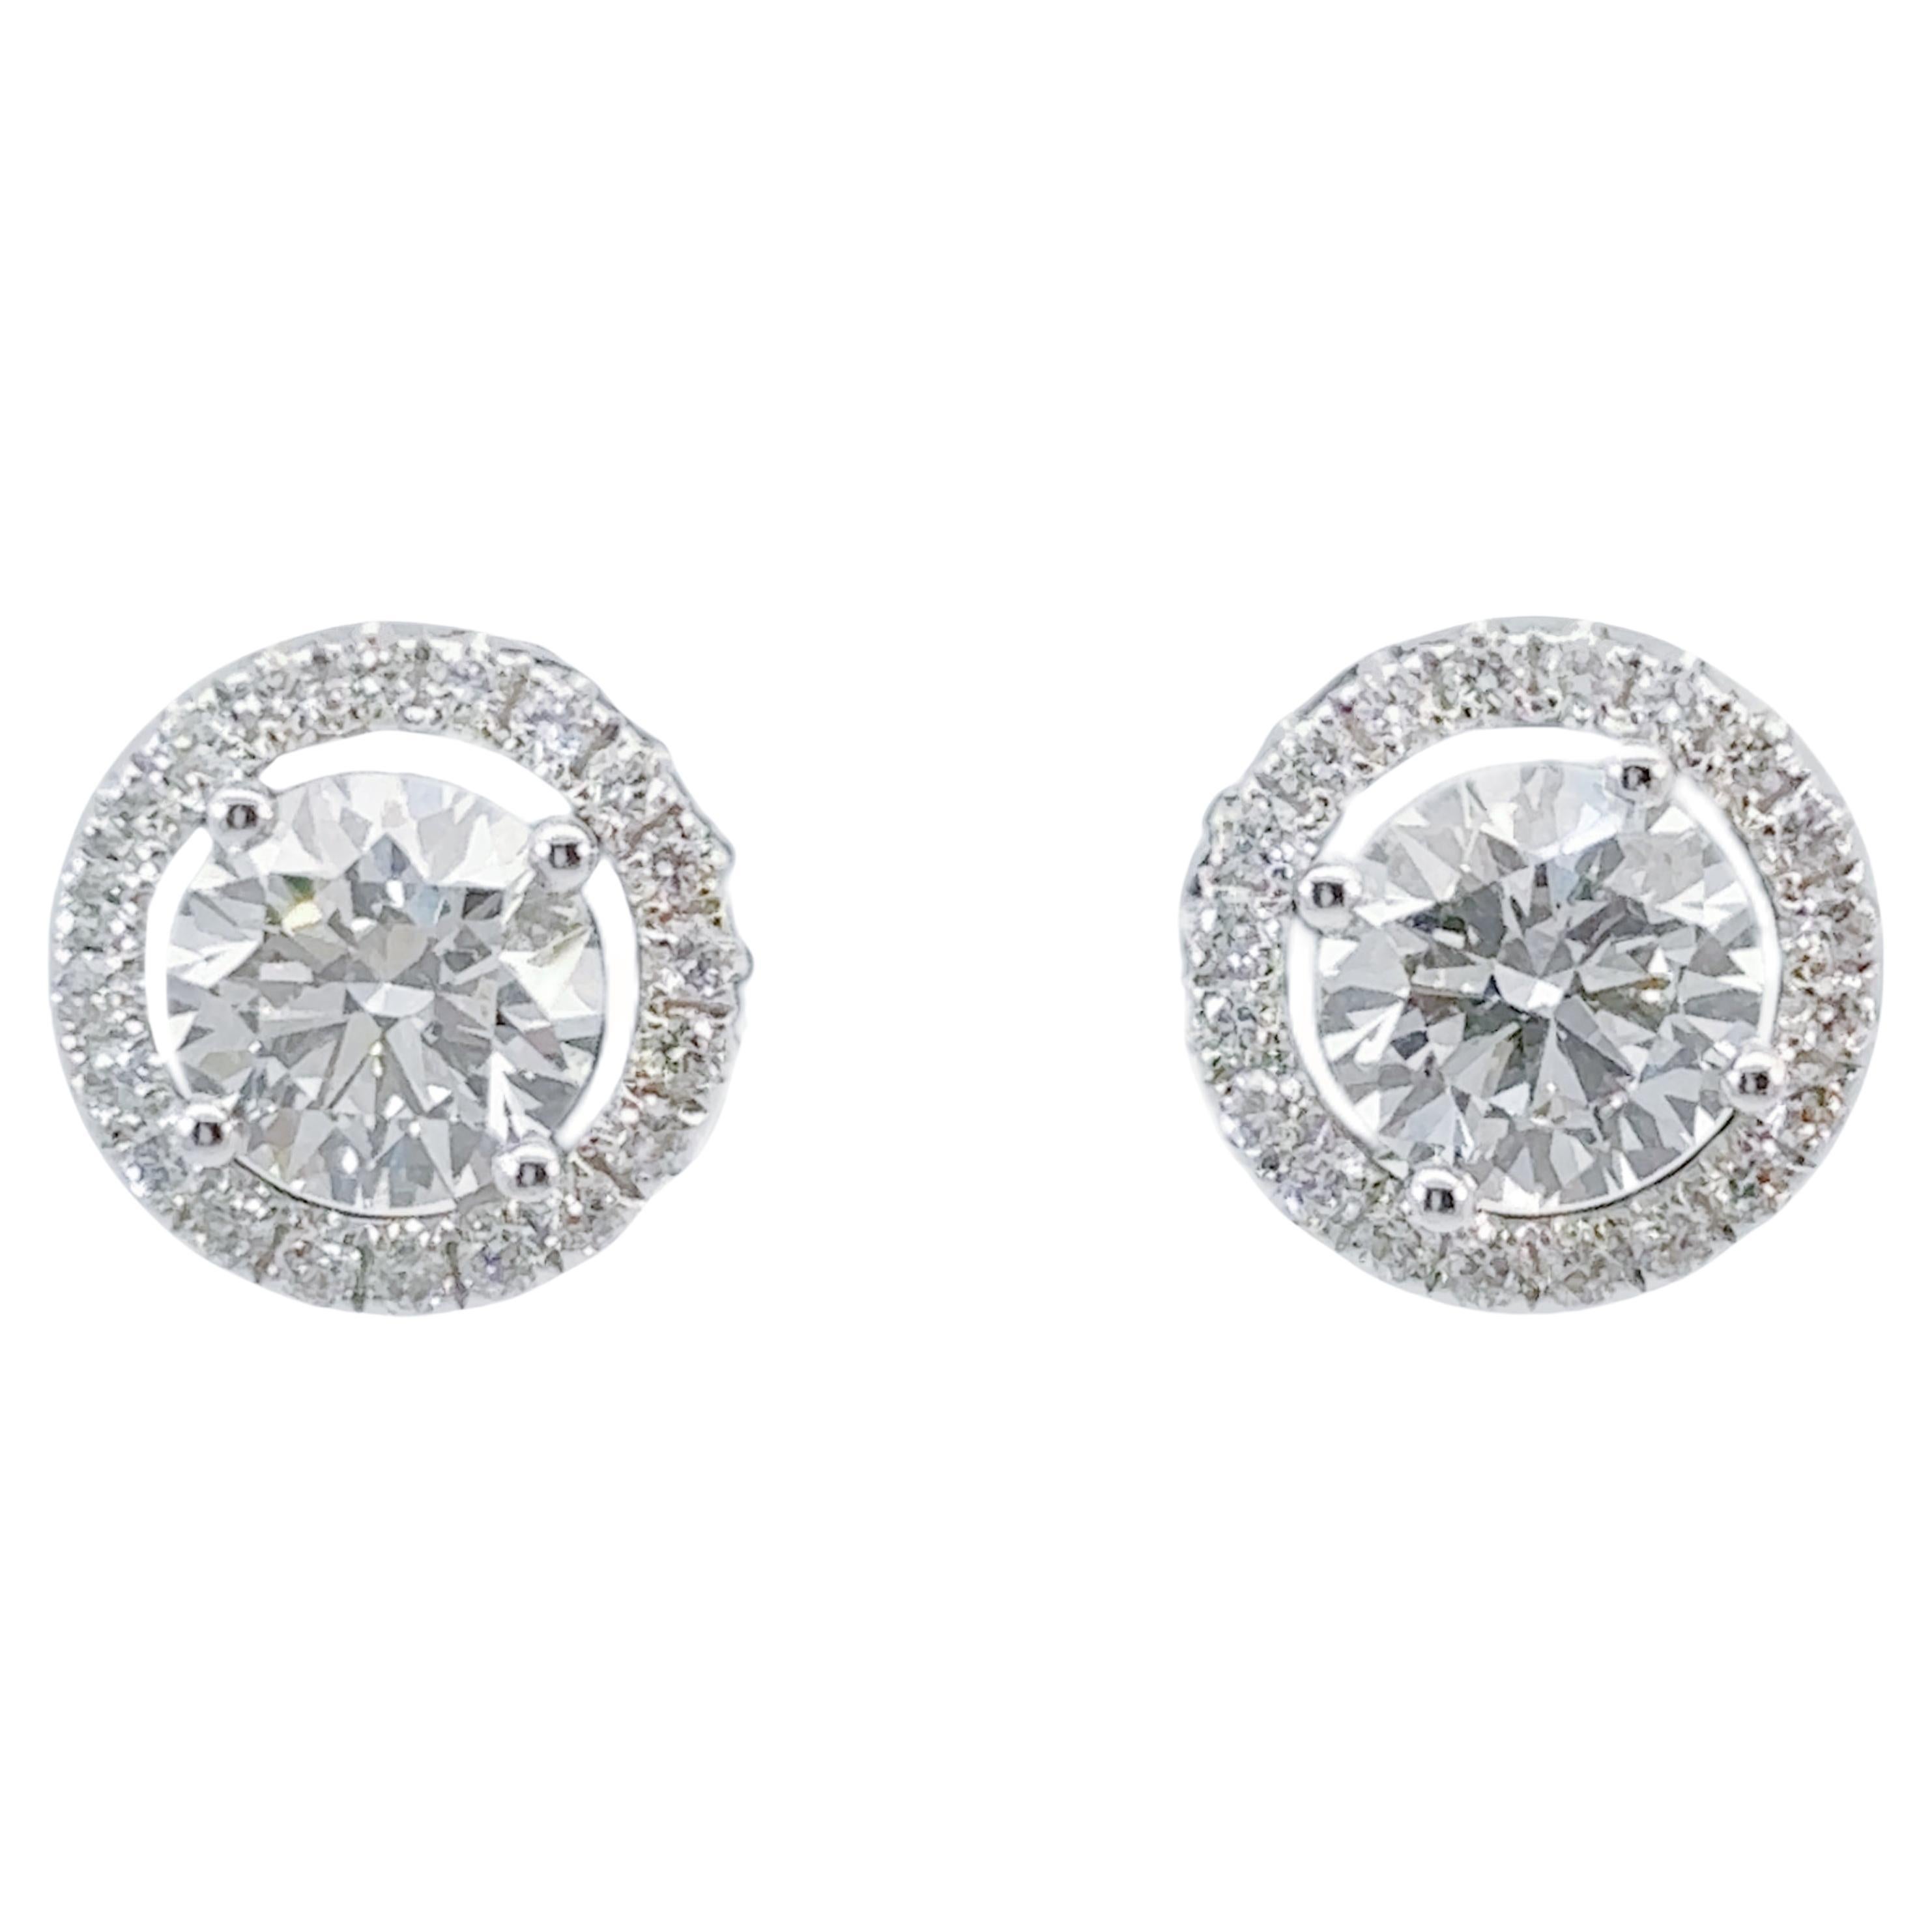 GIA-certified 2 Carat Diamond Halo 18k White Gold Stud Earrings Made to Order For Sale